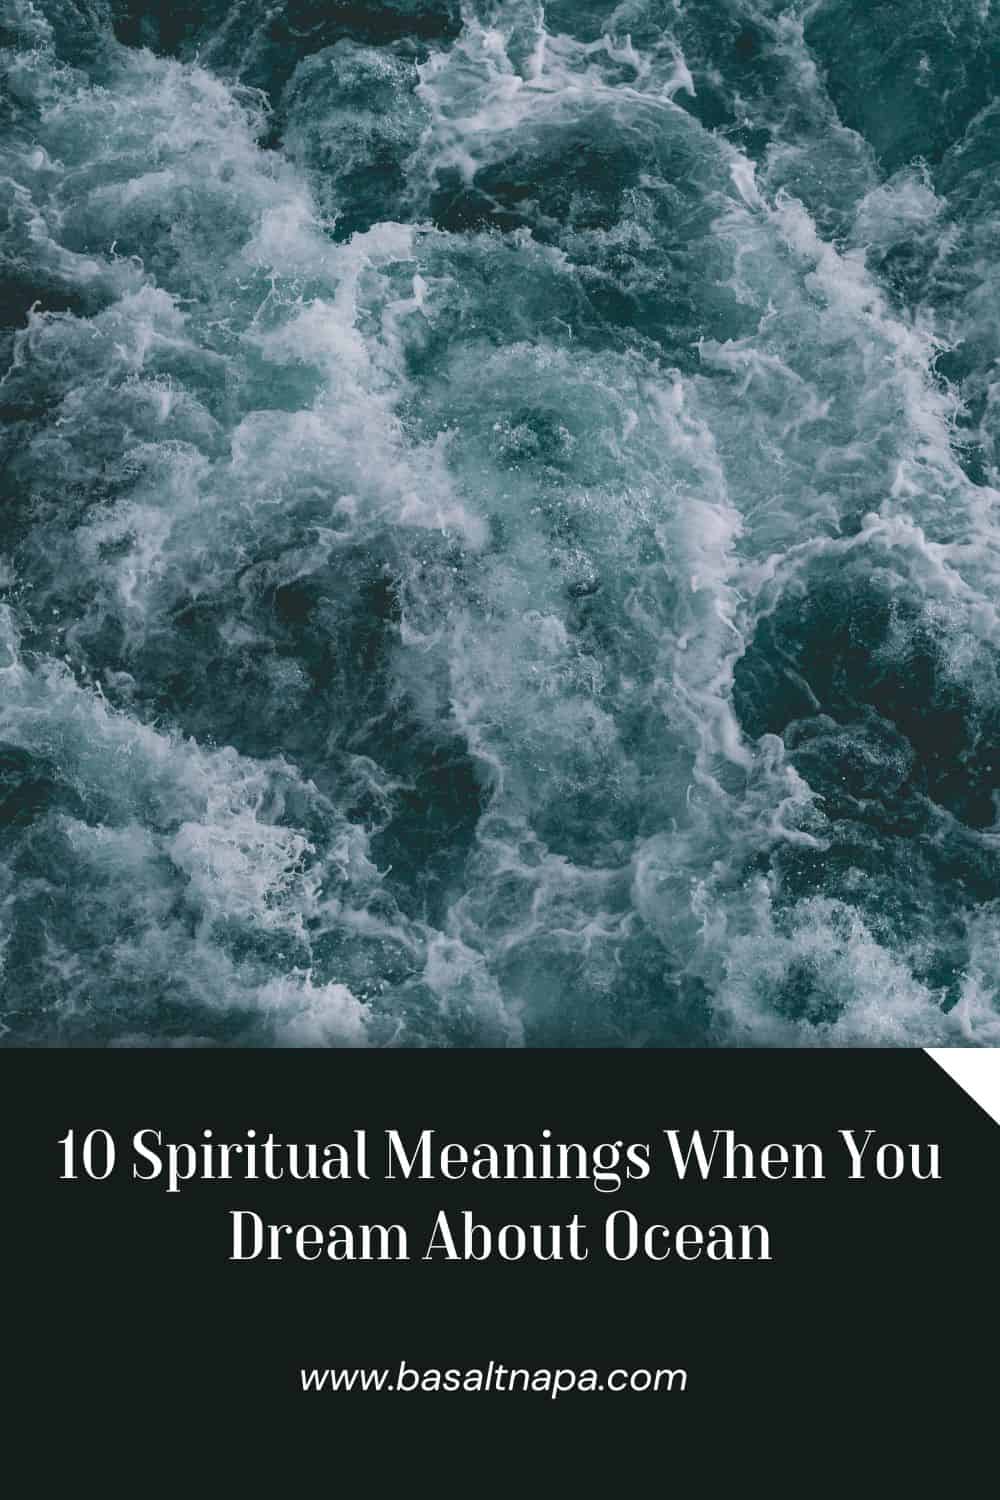 8 Spiritual Meanings of Dreaming About the Ocean